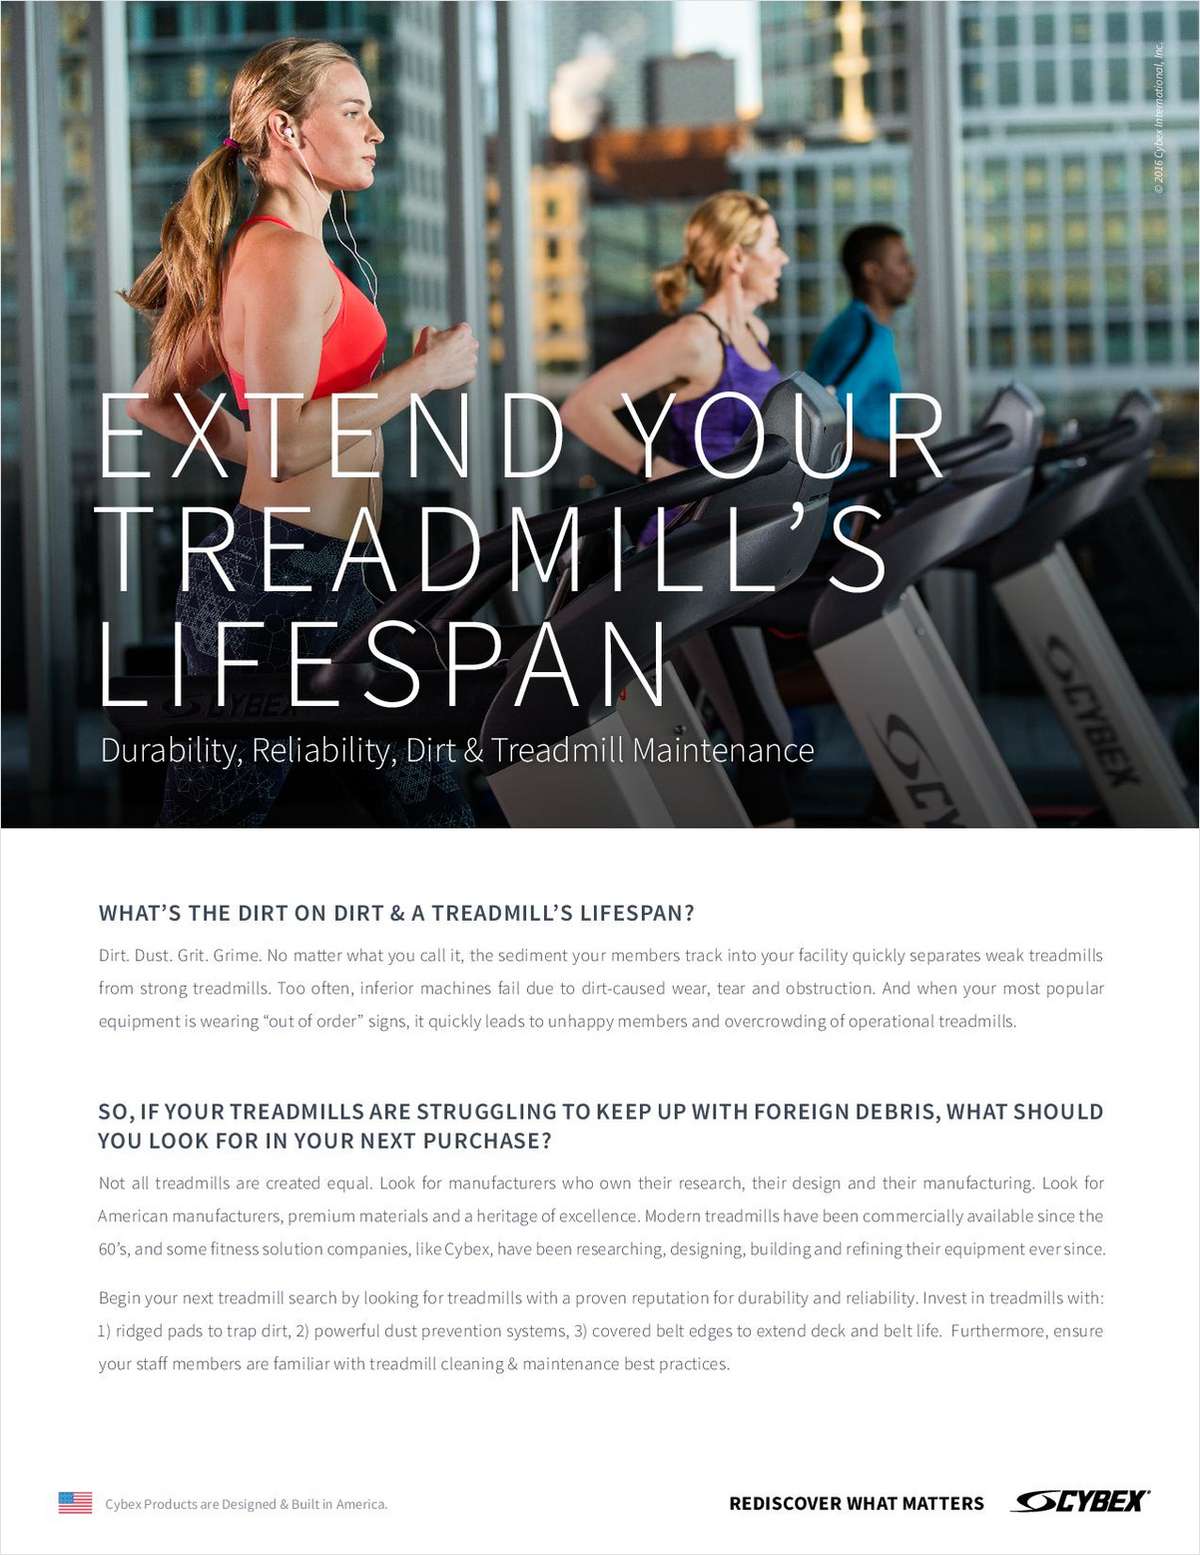 How to Extend Your Treadmill's Lifespan